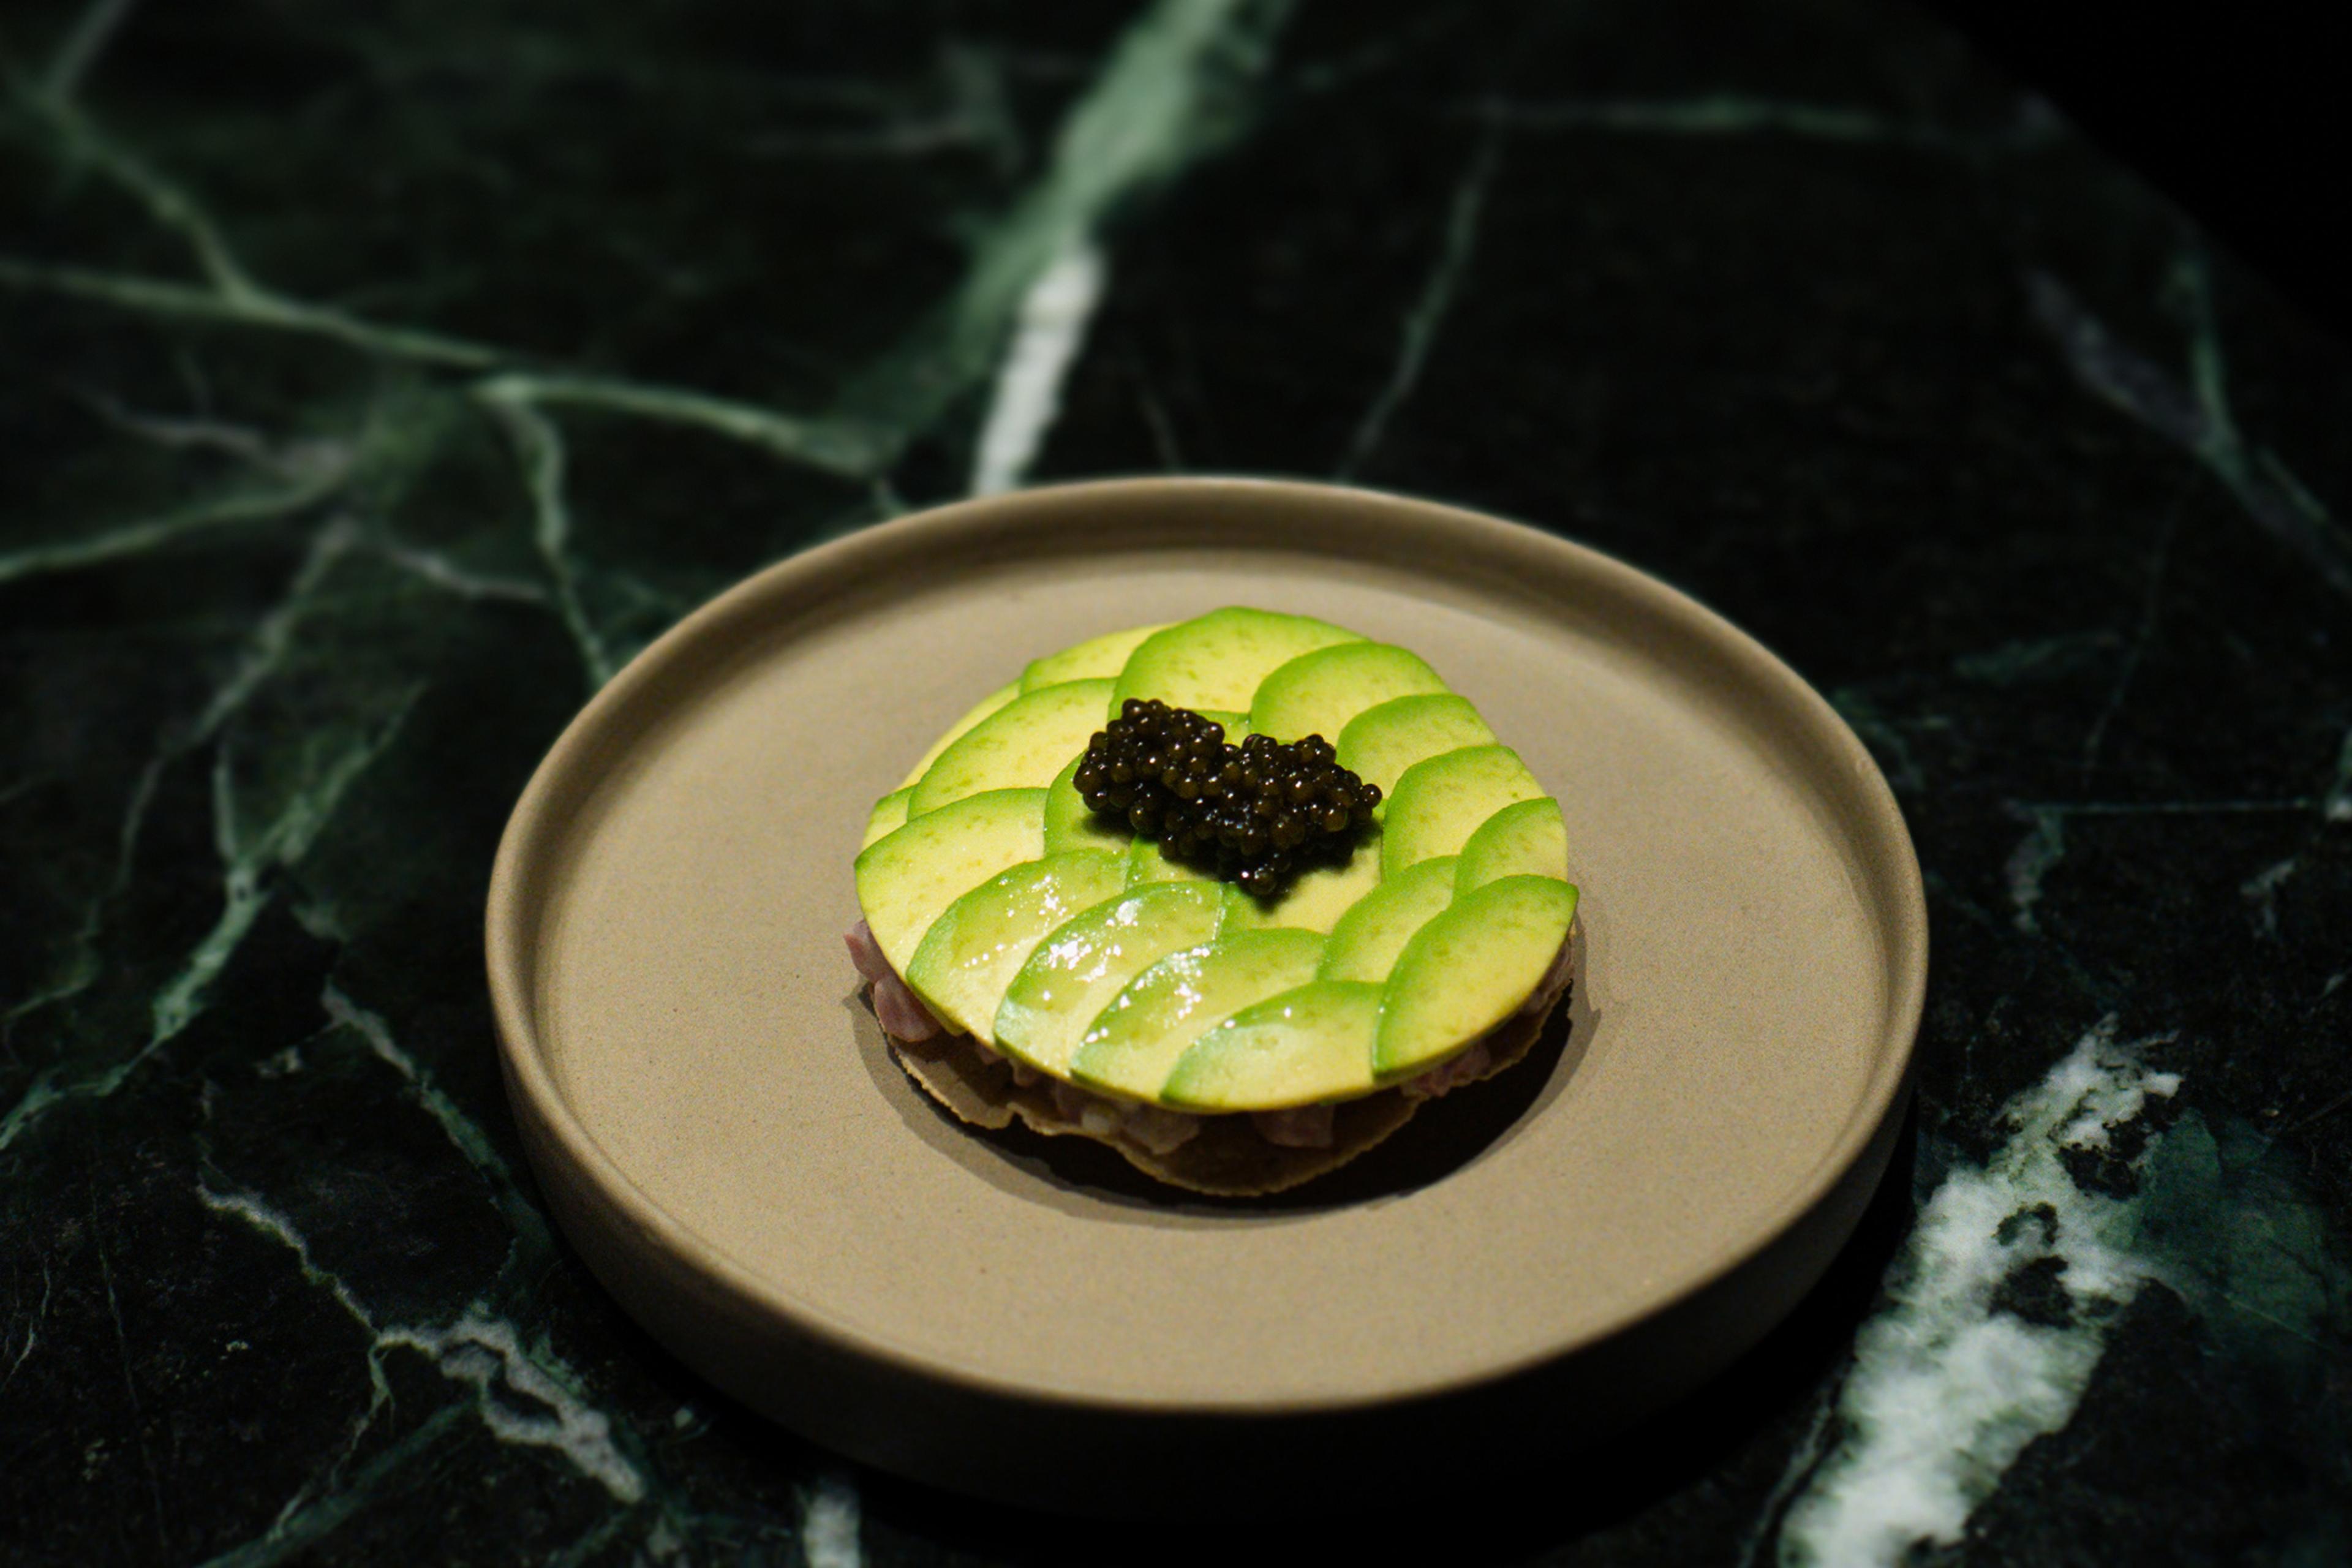 round meal with avocado slices and caviar